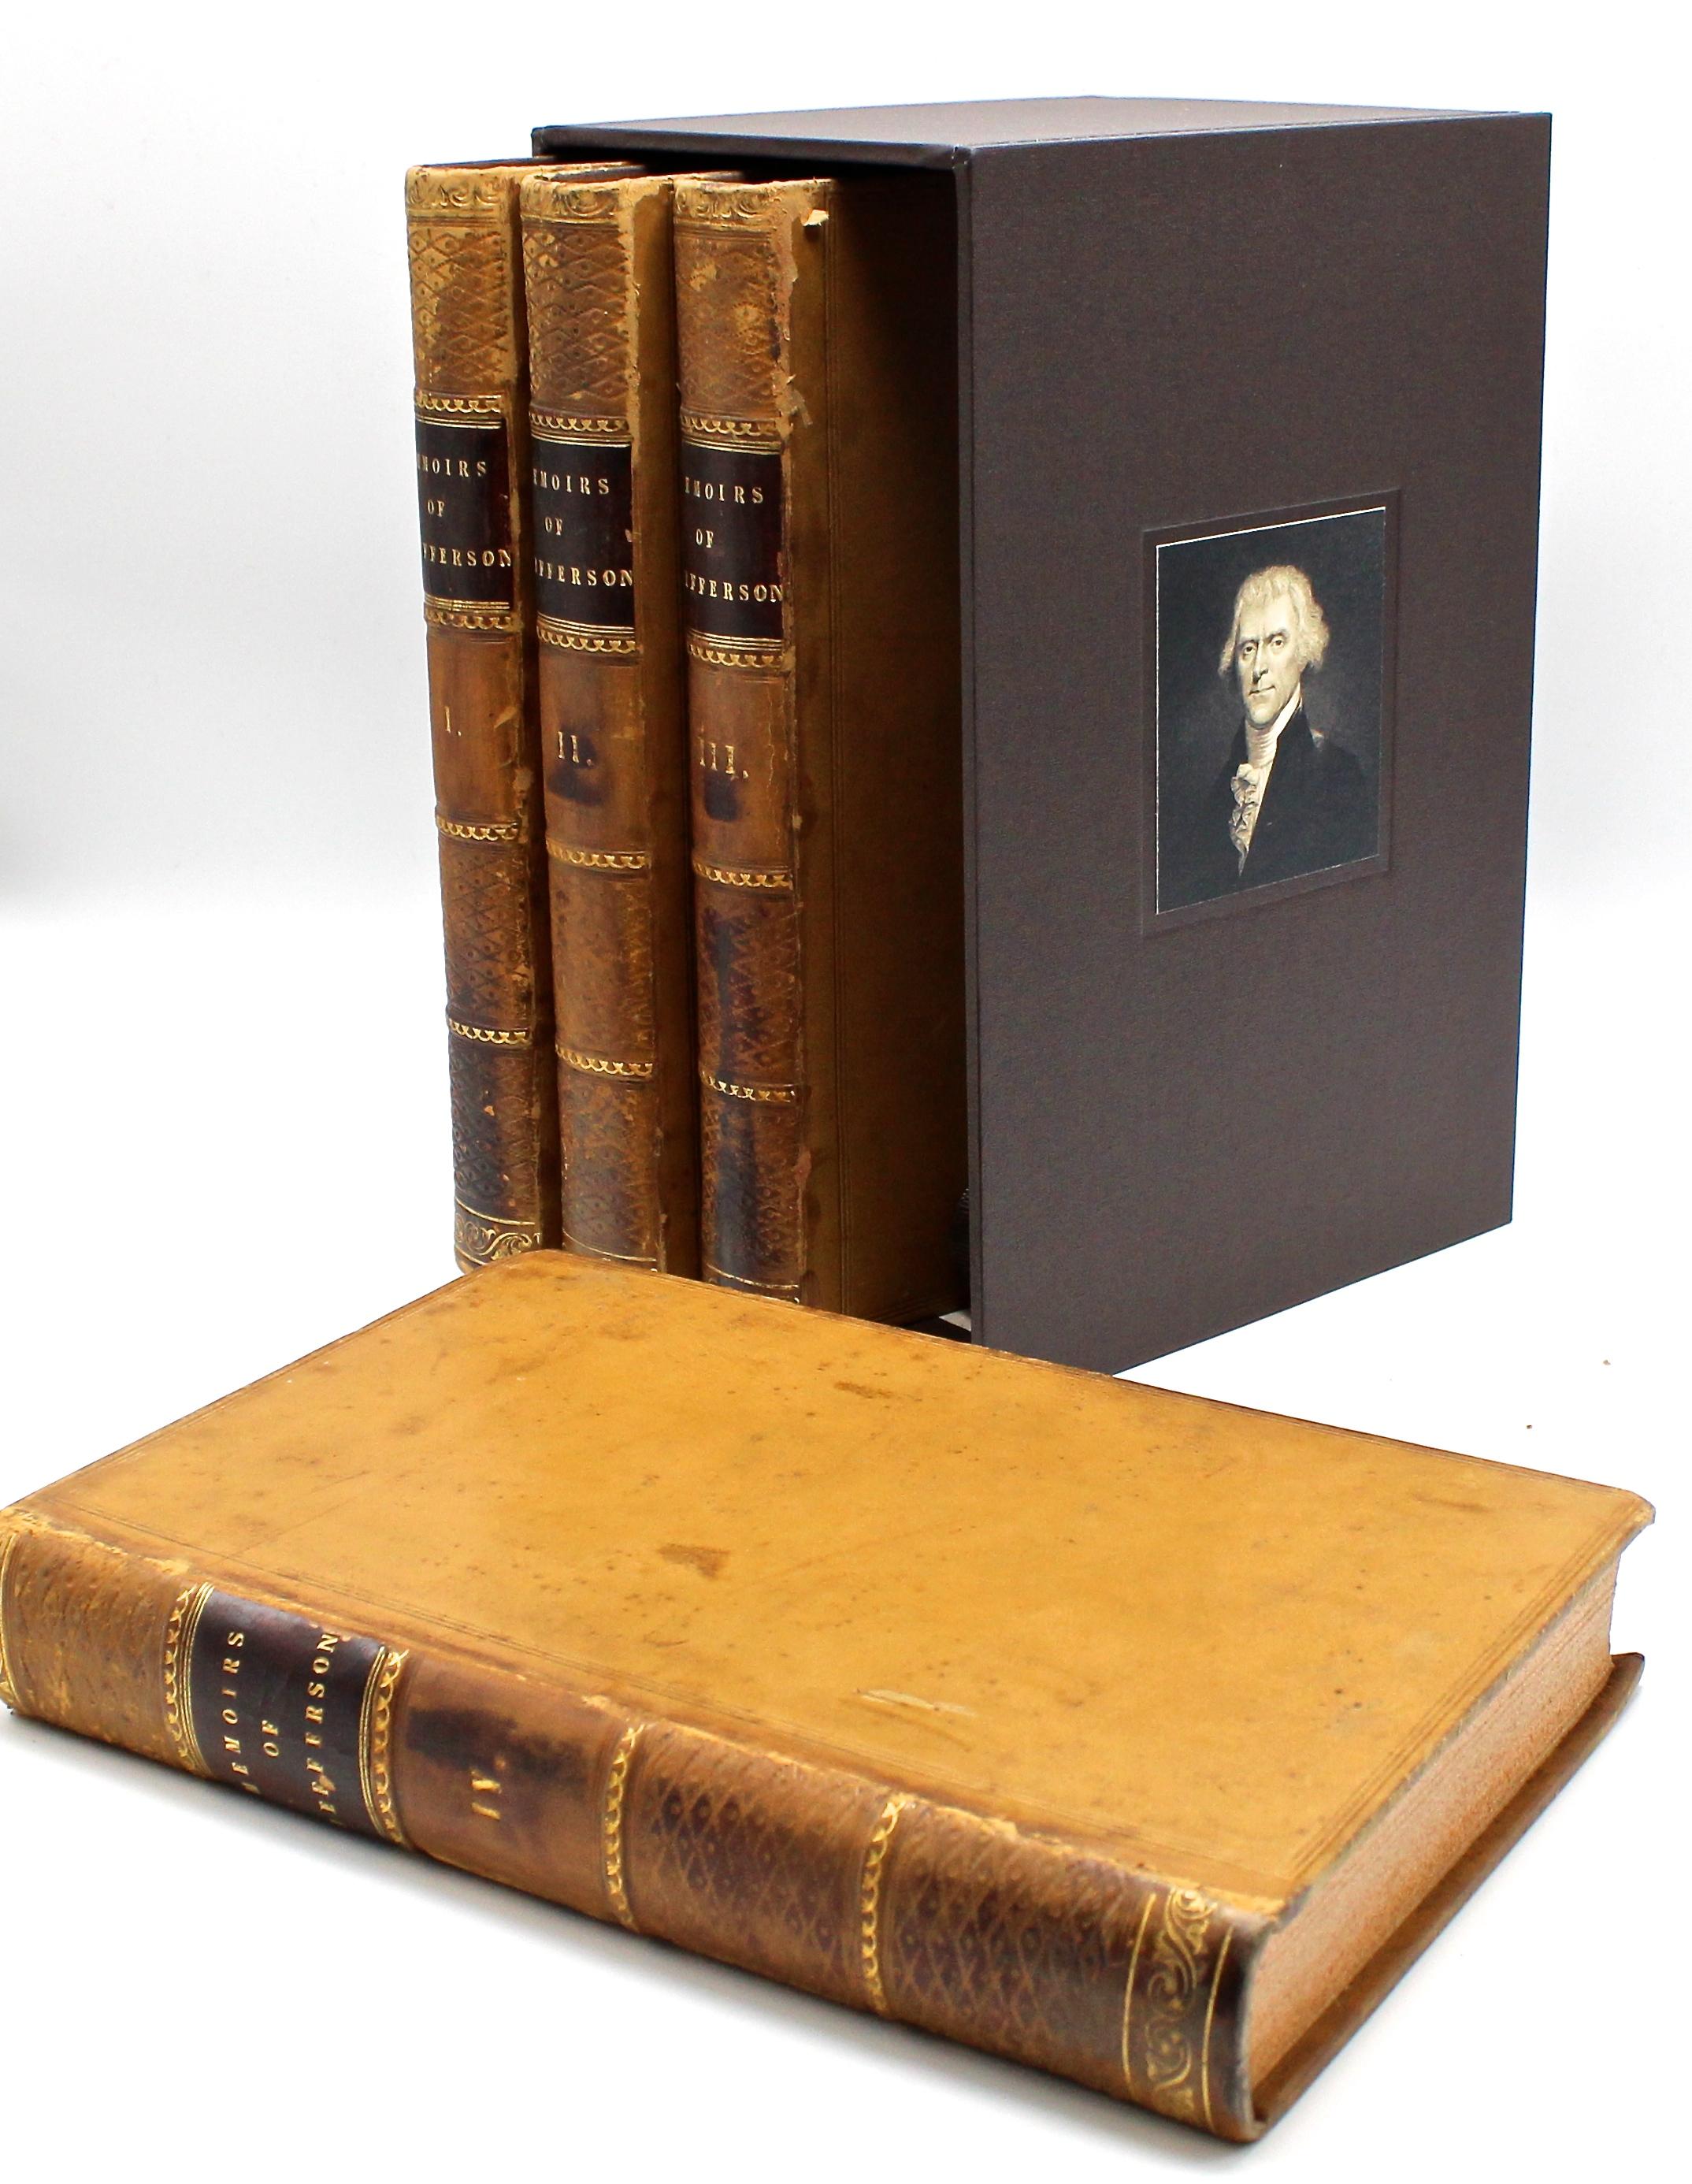 Jefferson, Thomas. Memoirs, Correspondence, and Papers of Thomas Jefferson, Late President of the United States. Edited by Thomas Jefferson Randolph. London: Henry Coleburn and Richard Bently: 1829. First UK edition four volume set with period